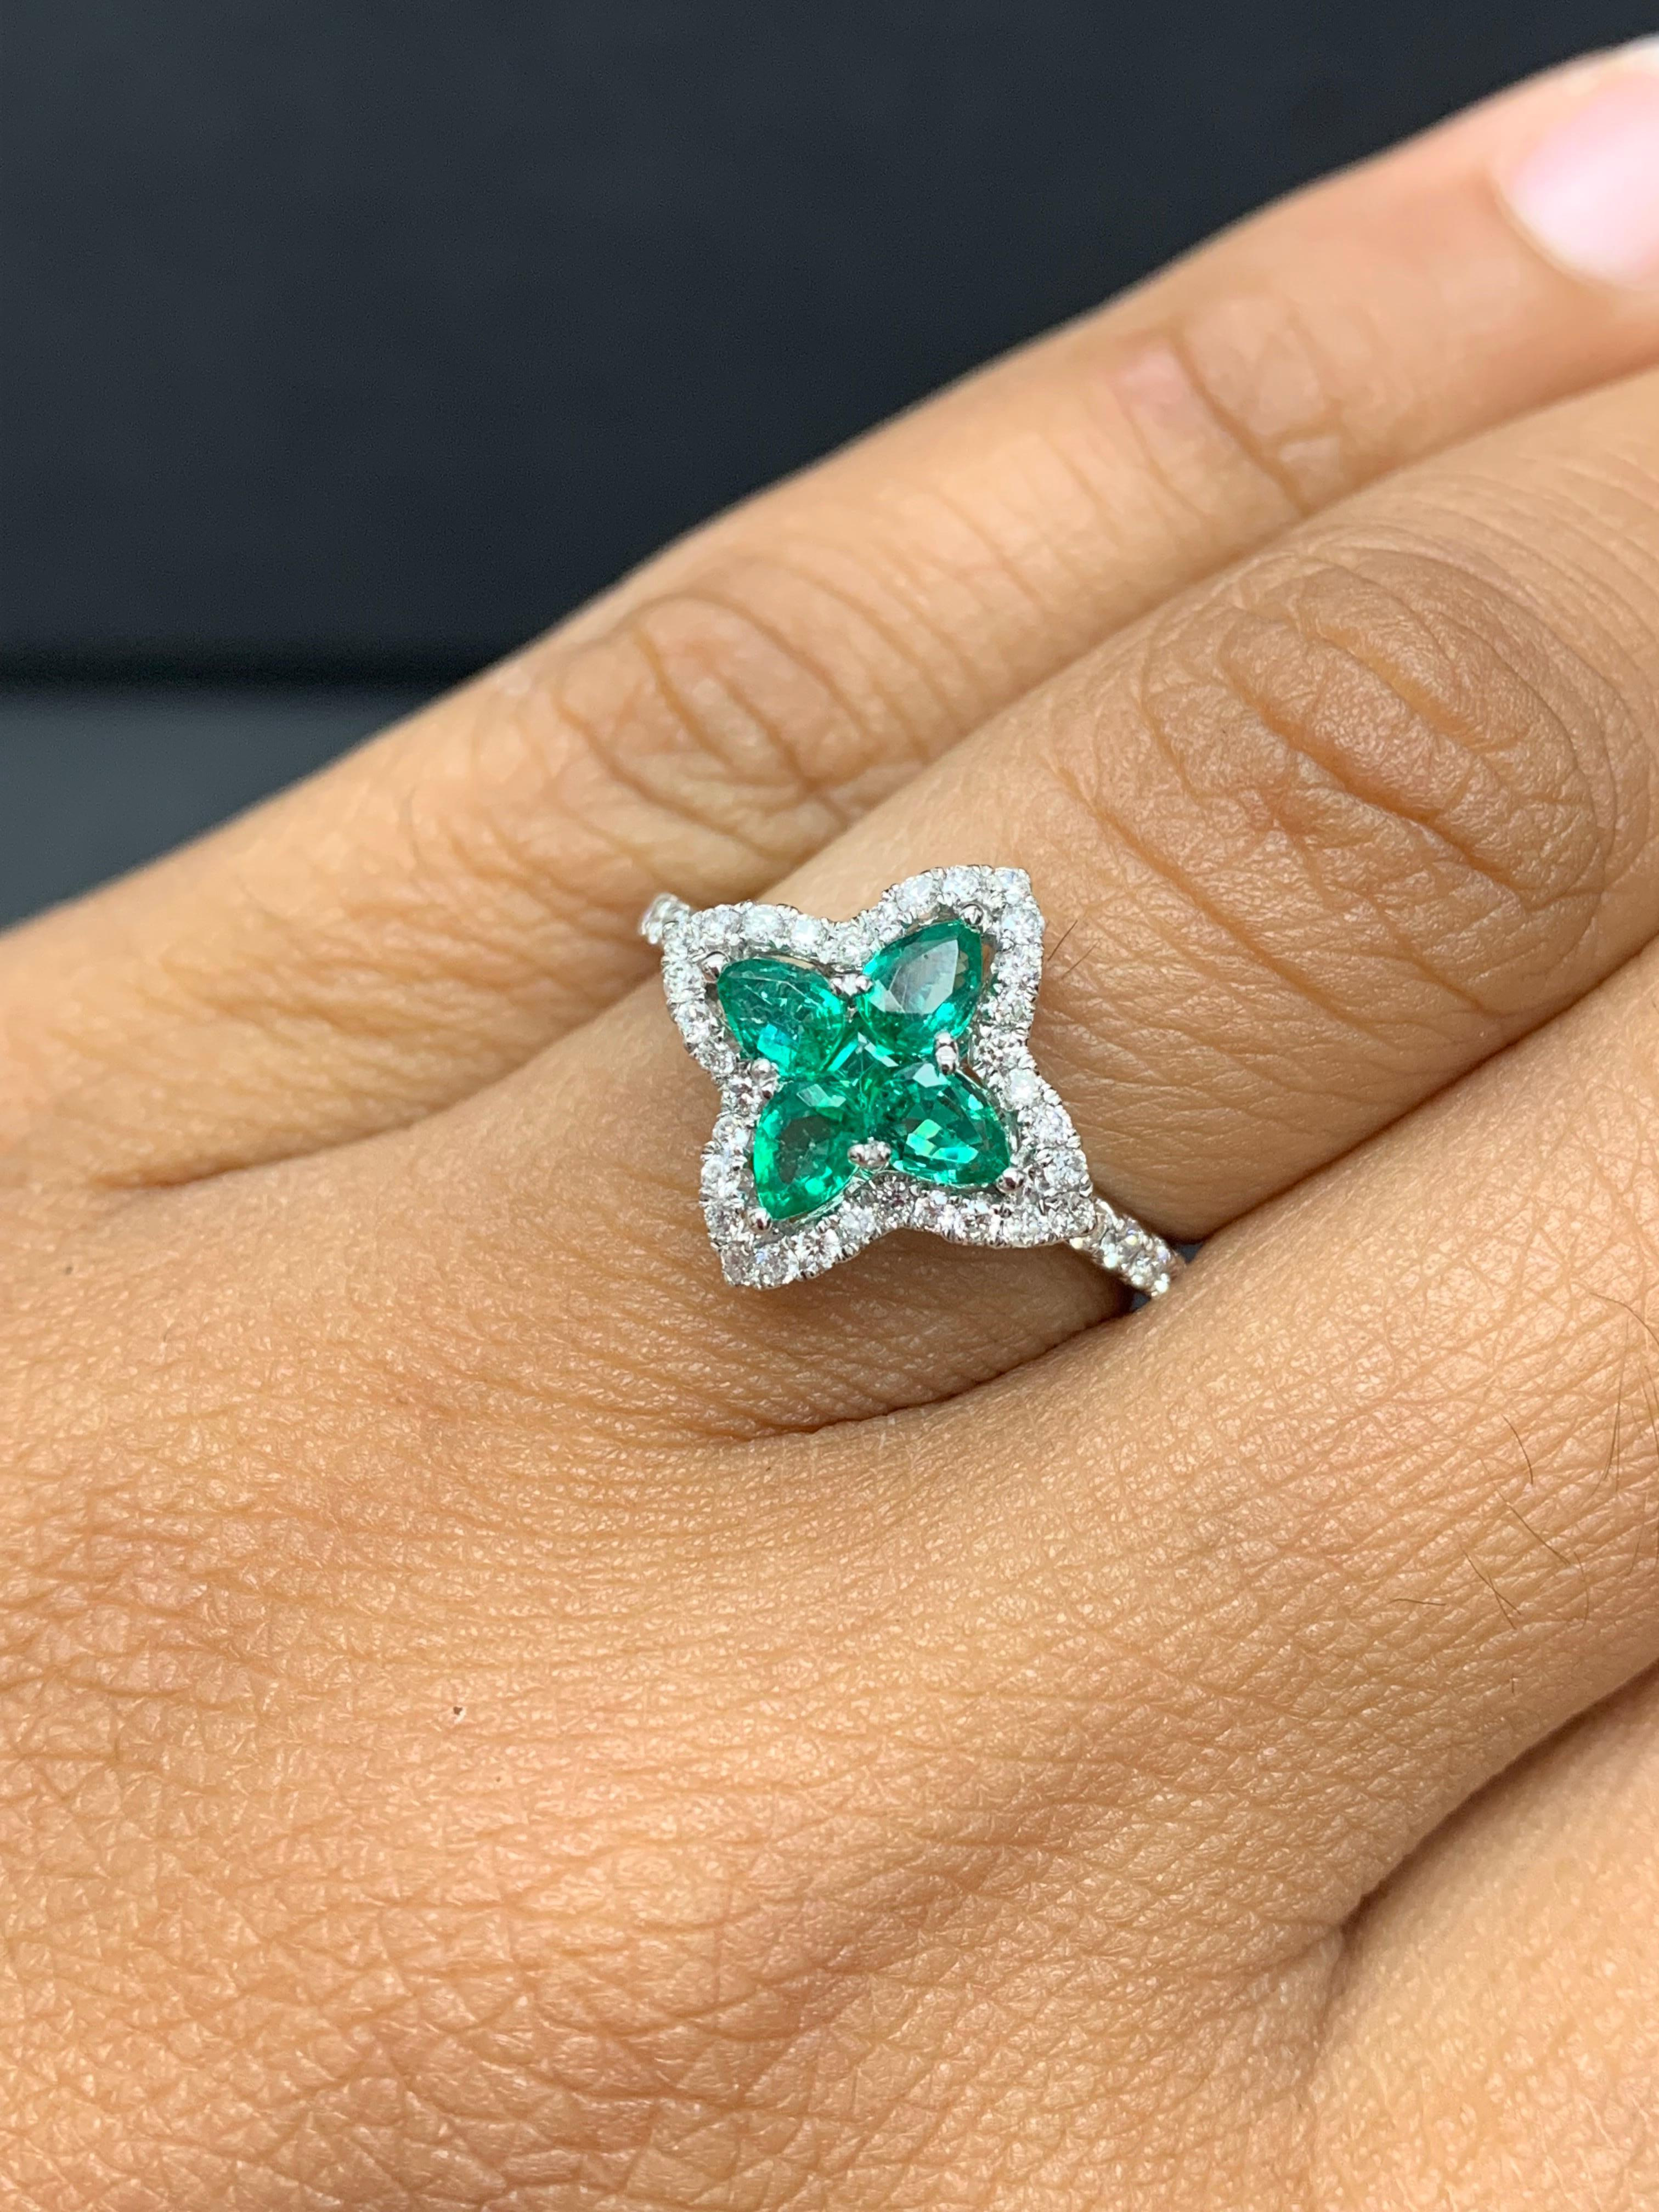 0.56 Carat Pear Shape Emerald and Diamond Cocktail Ring in 18K White Gold For Sale 3